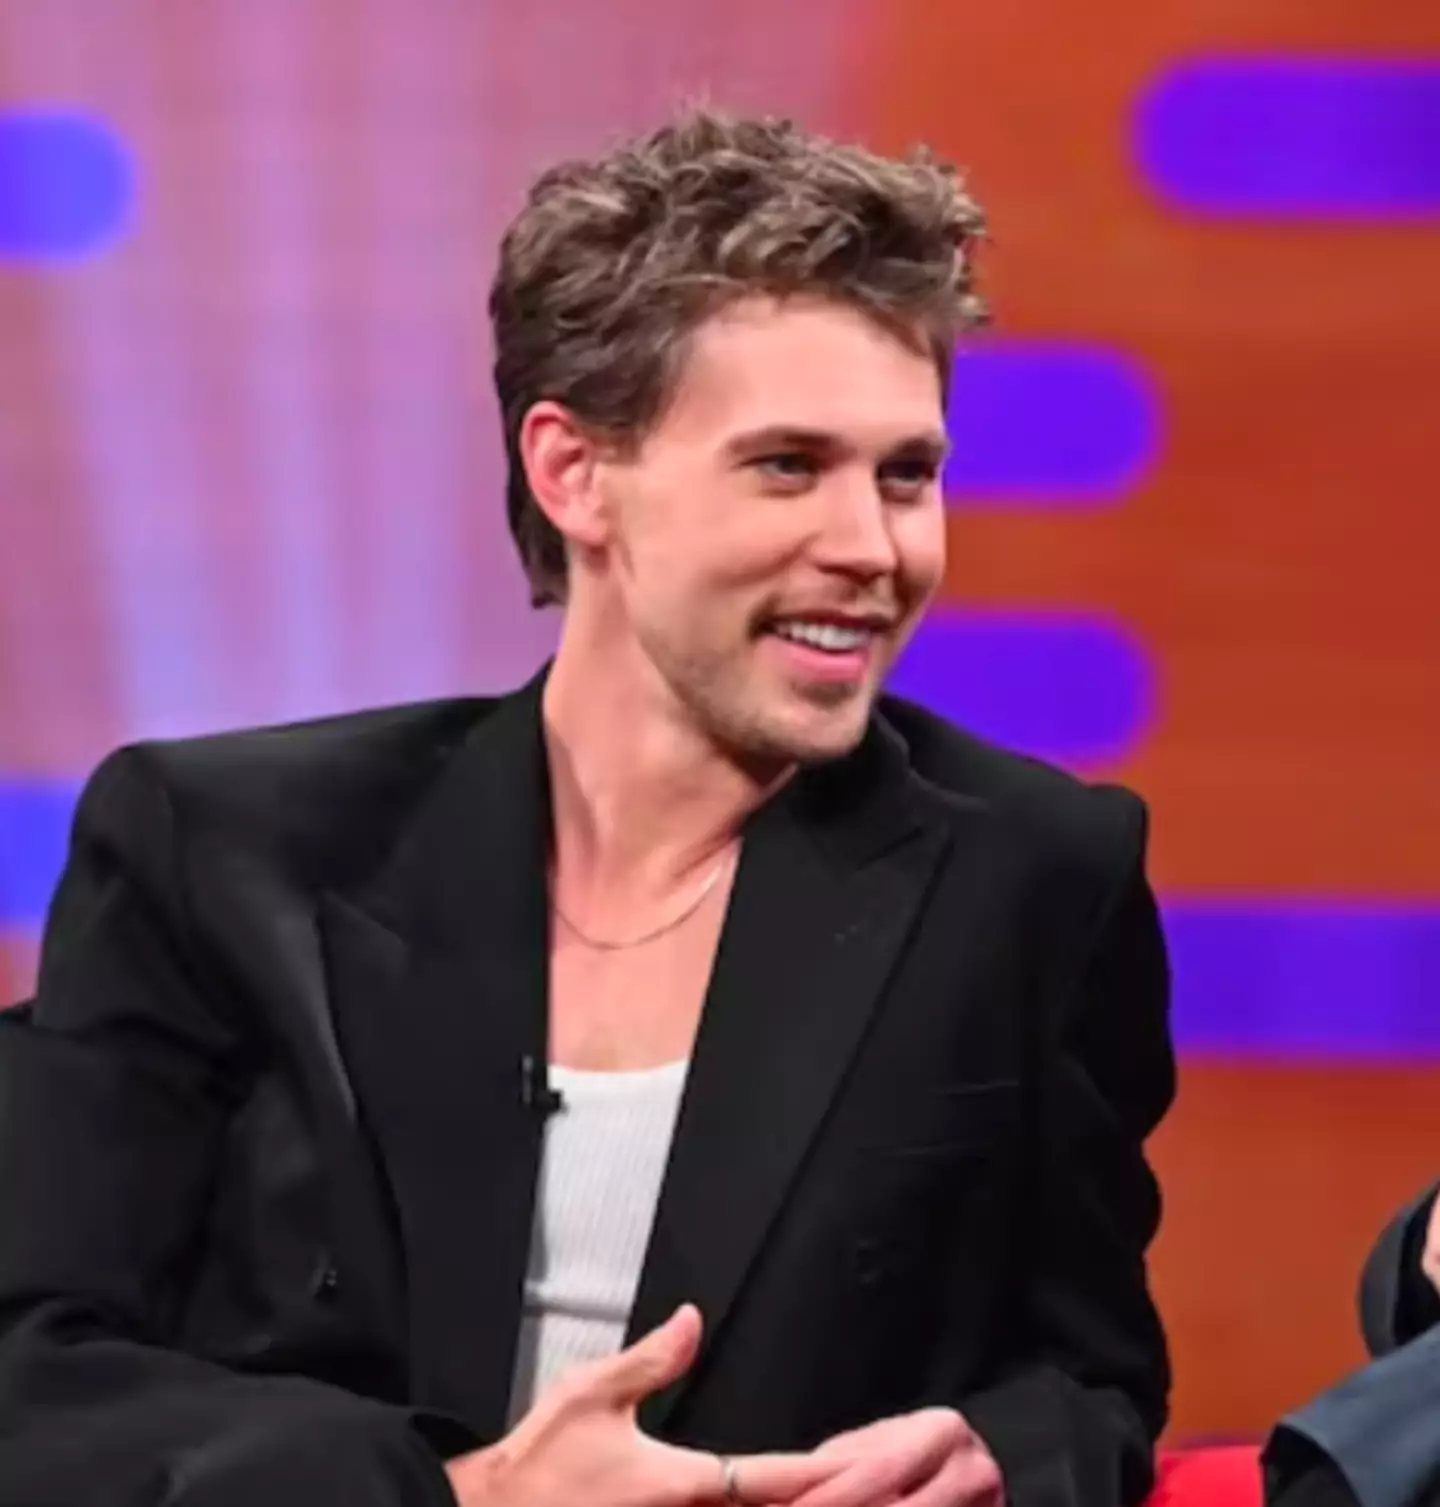 Austin Butler raved about his fellow talk show guests while appearing on The Graham Norton Show.